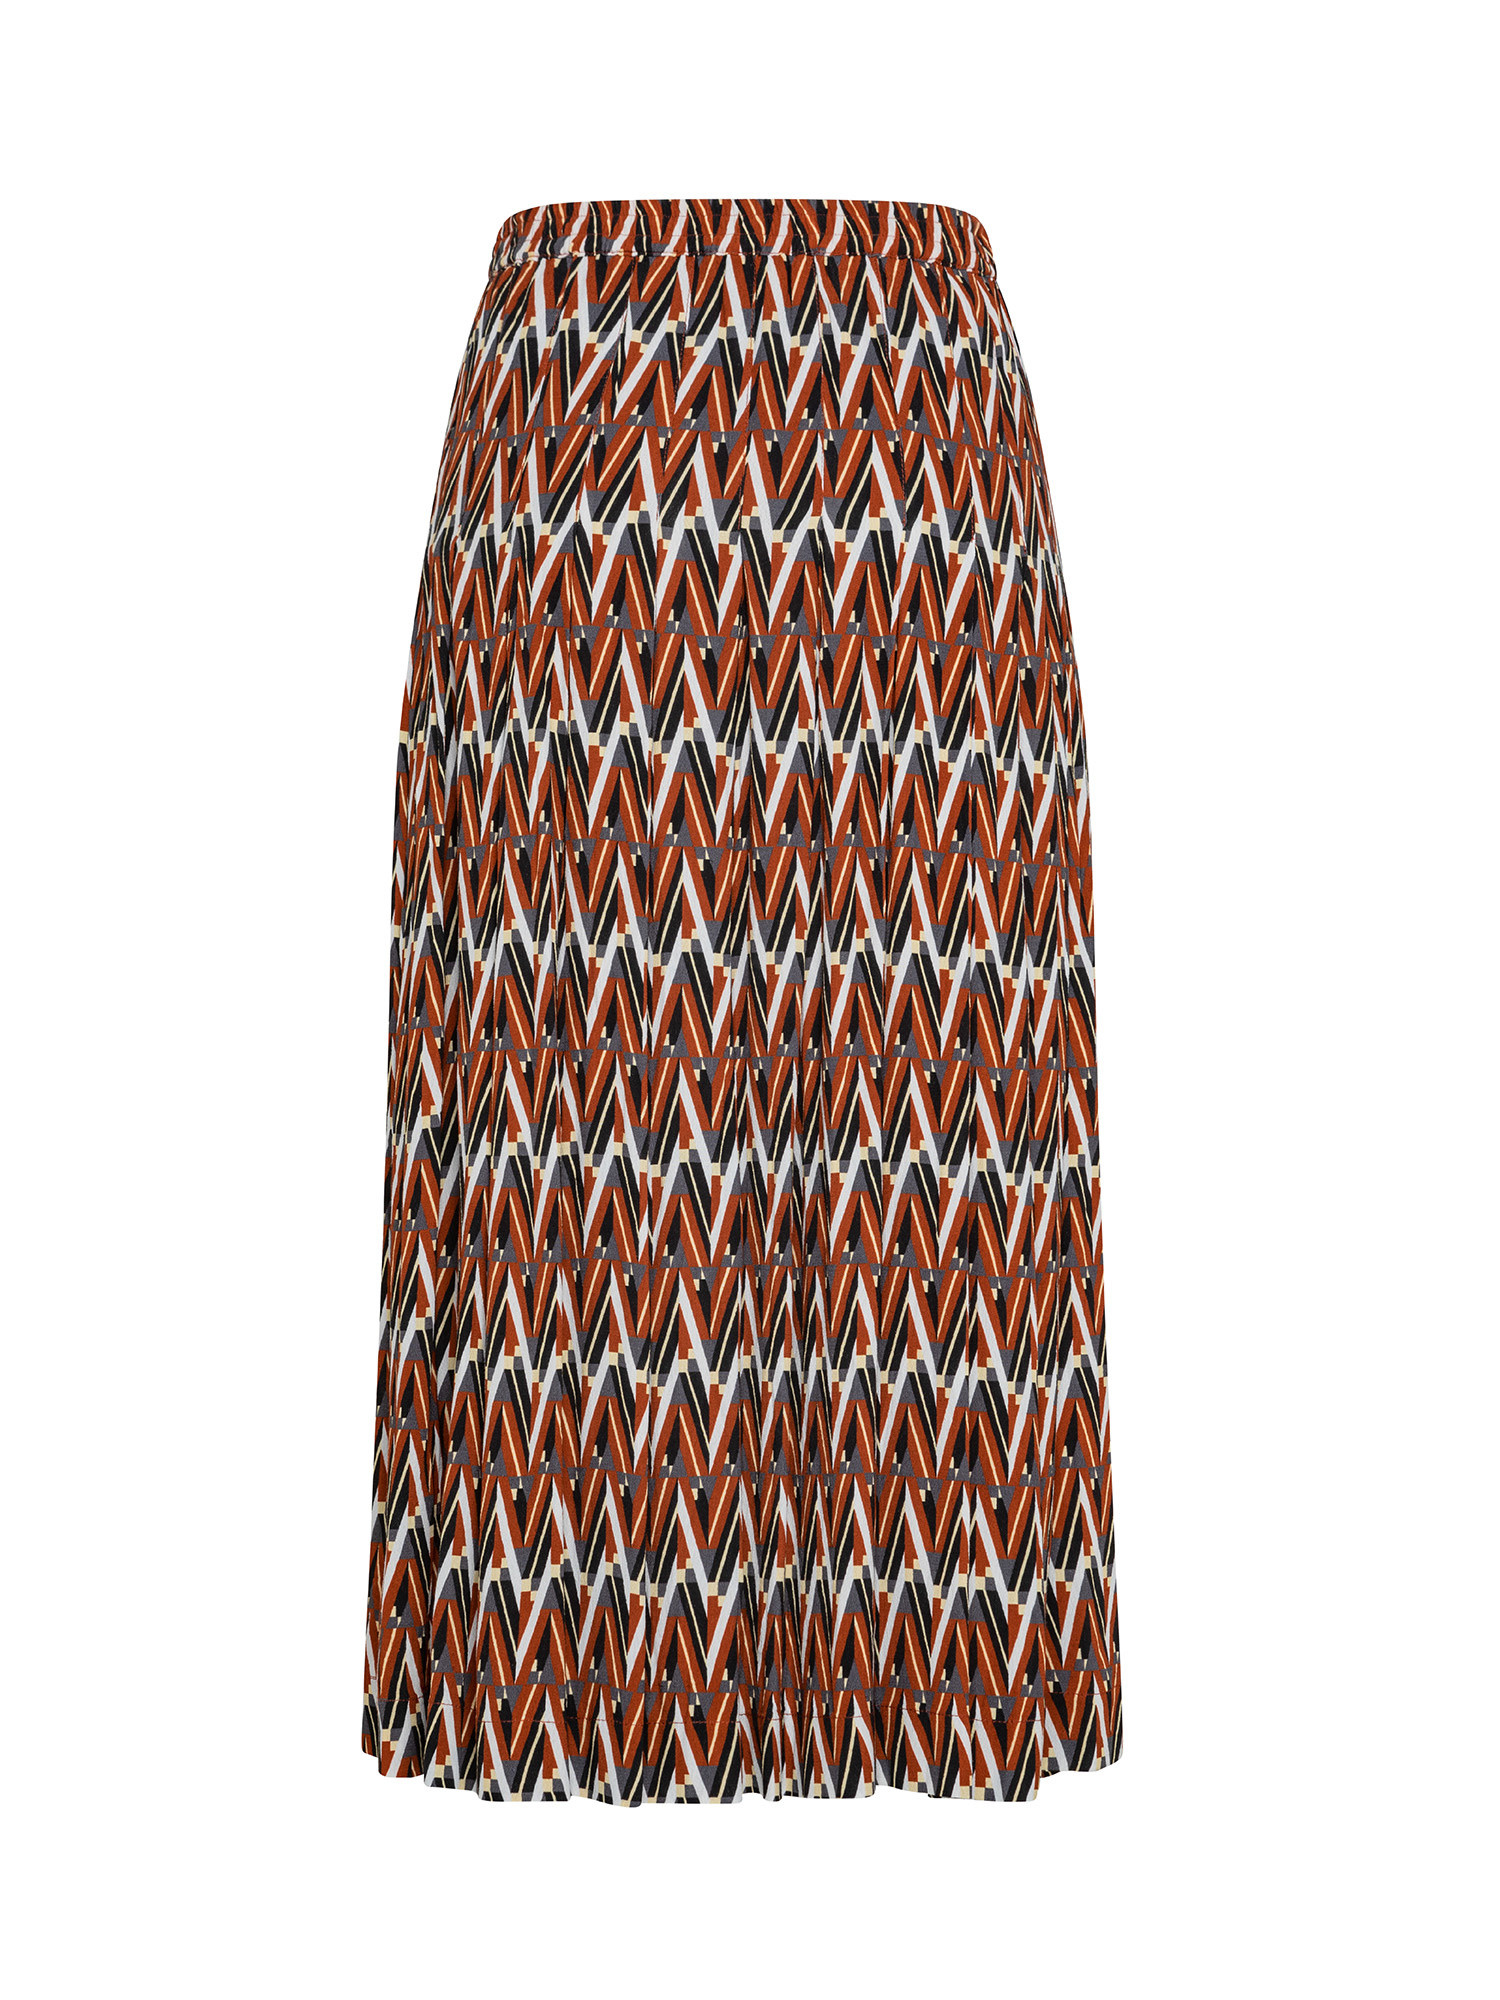 Pleated midi skirt in viscose crepe, Brown, large image number 0